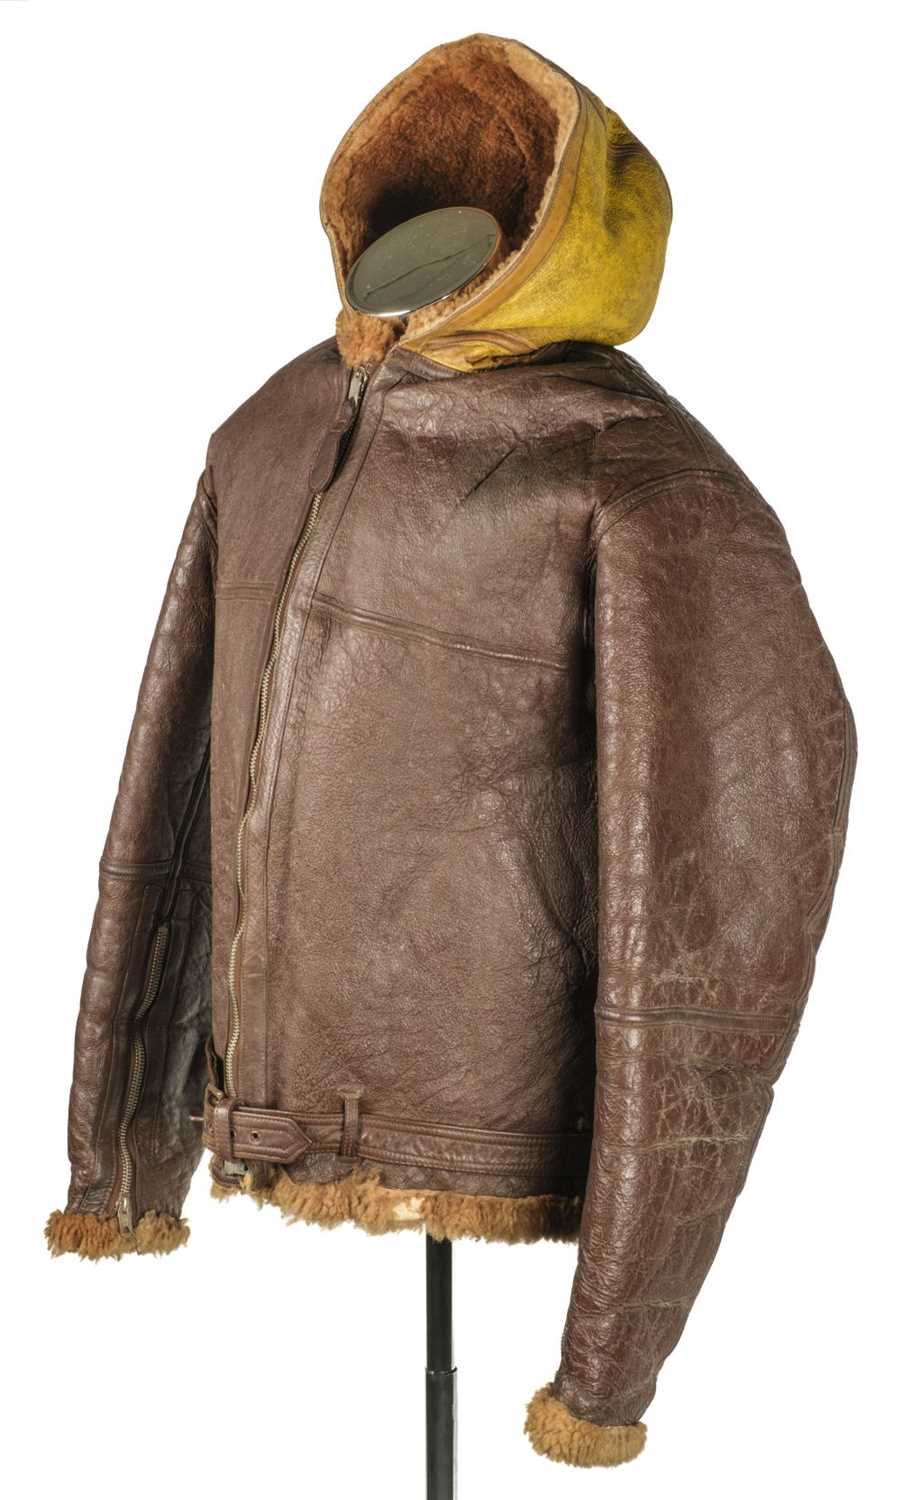 Lot 179 - Flying Jacket. WWII Irvin brown leather flying jacket - Coastal Command / Fleet Air Arm, Royal Navy